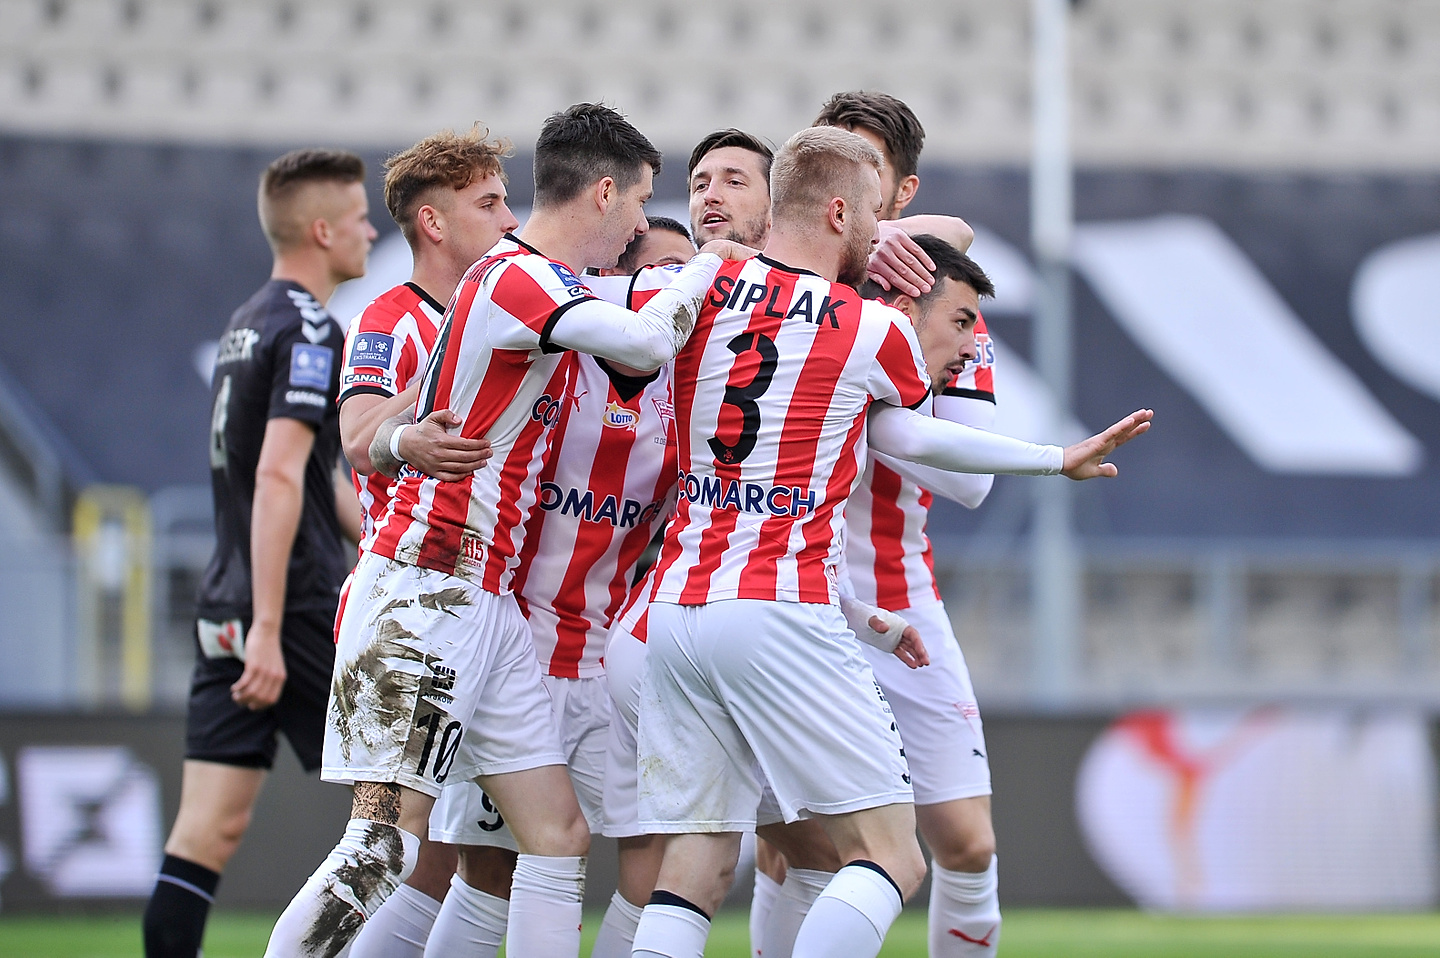 Cracovia beats Gornik Zabrze! 3 points are staying at home.